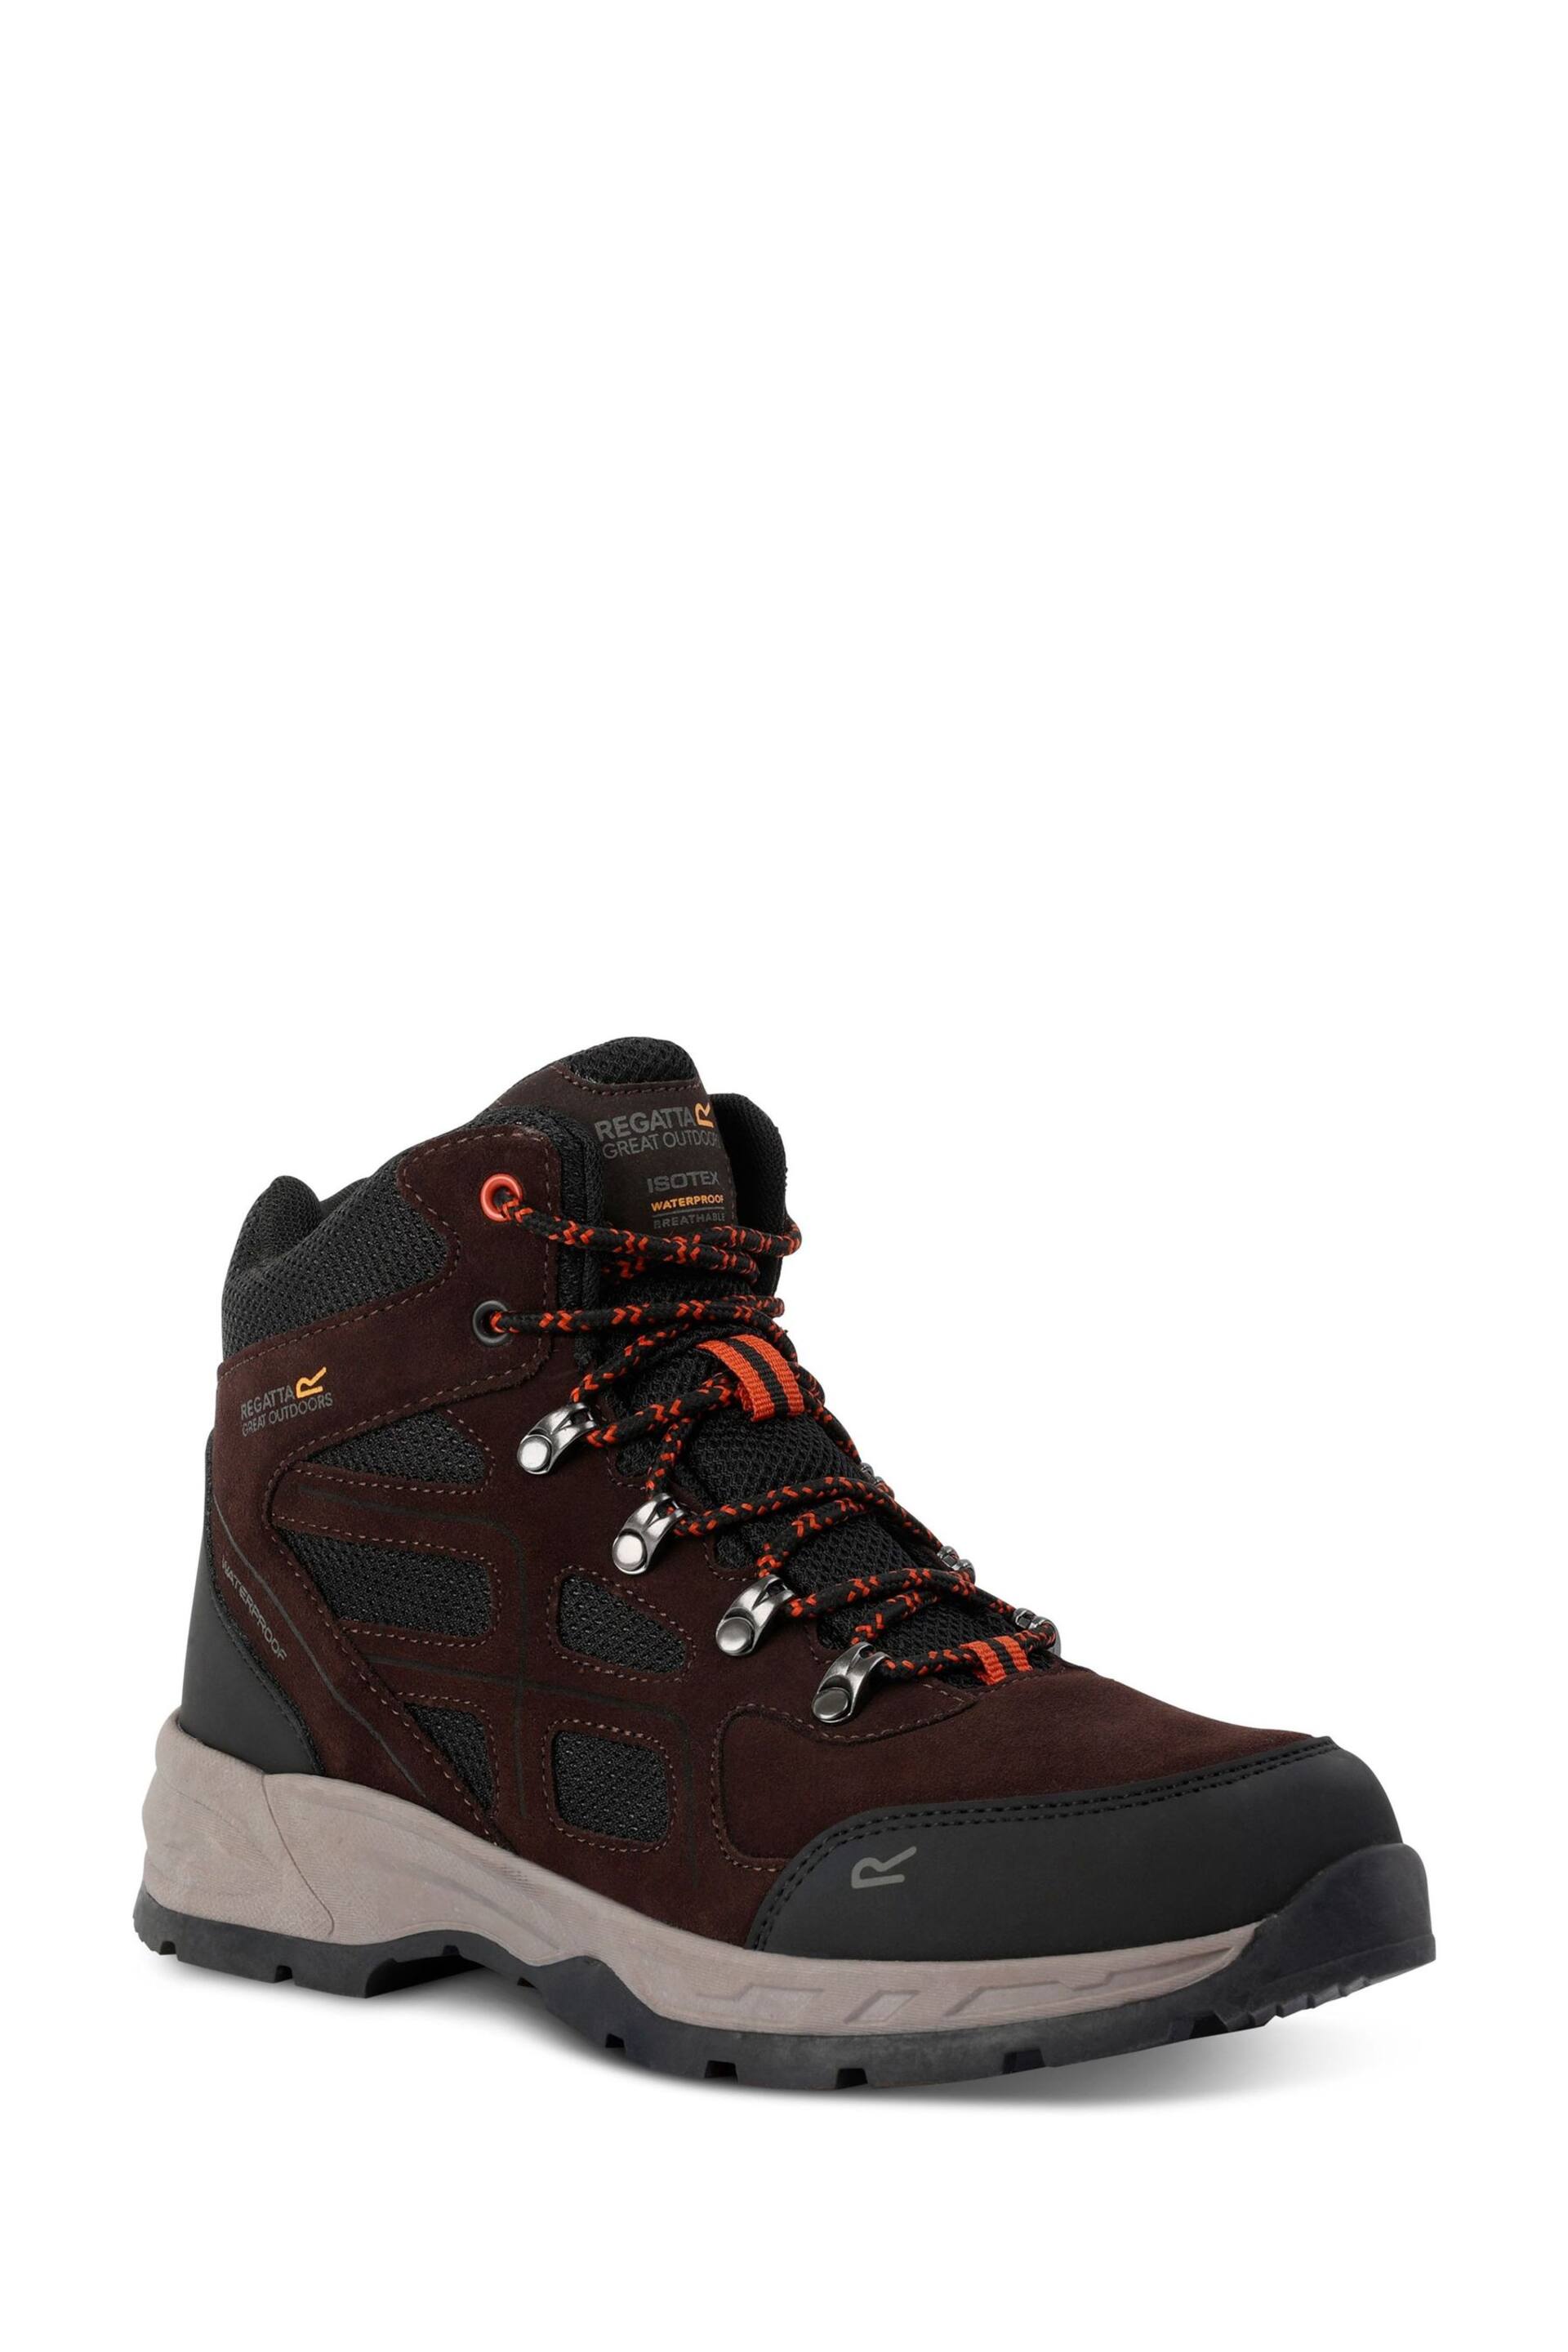 Regatta Brown Vendeavour Suede Waterproof Hiking Boots - Image 1 of 8